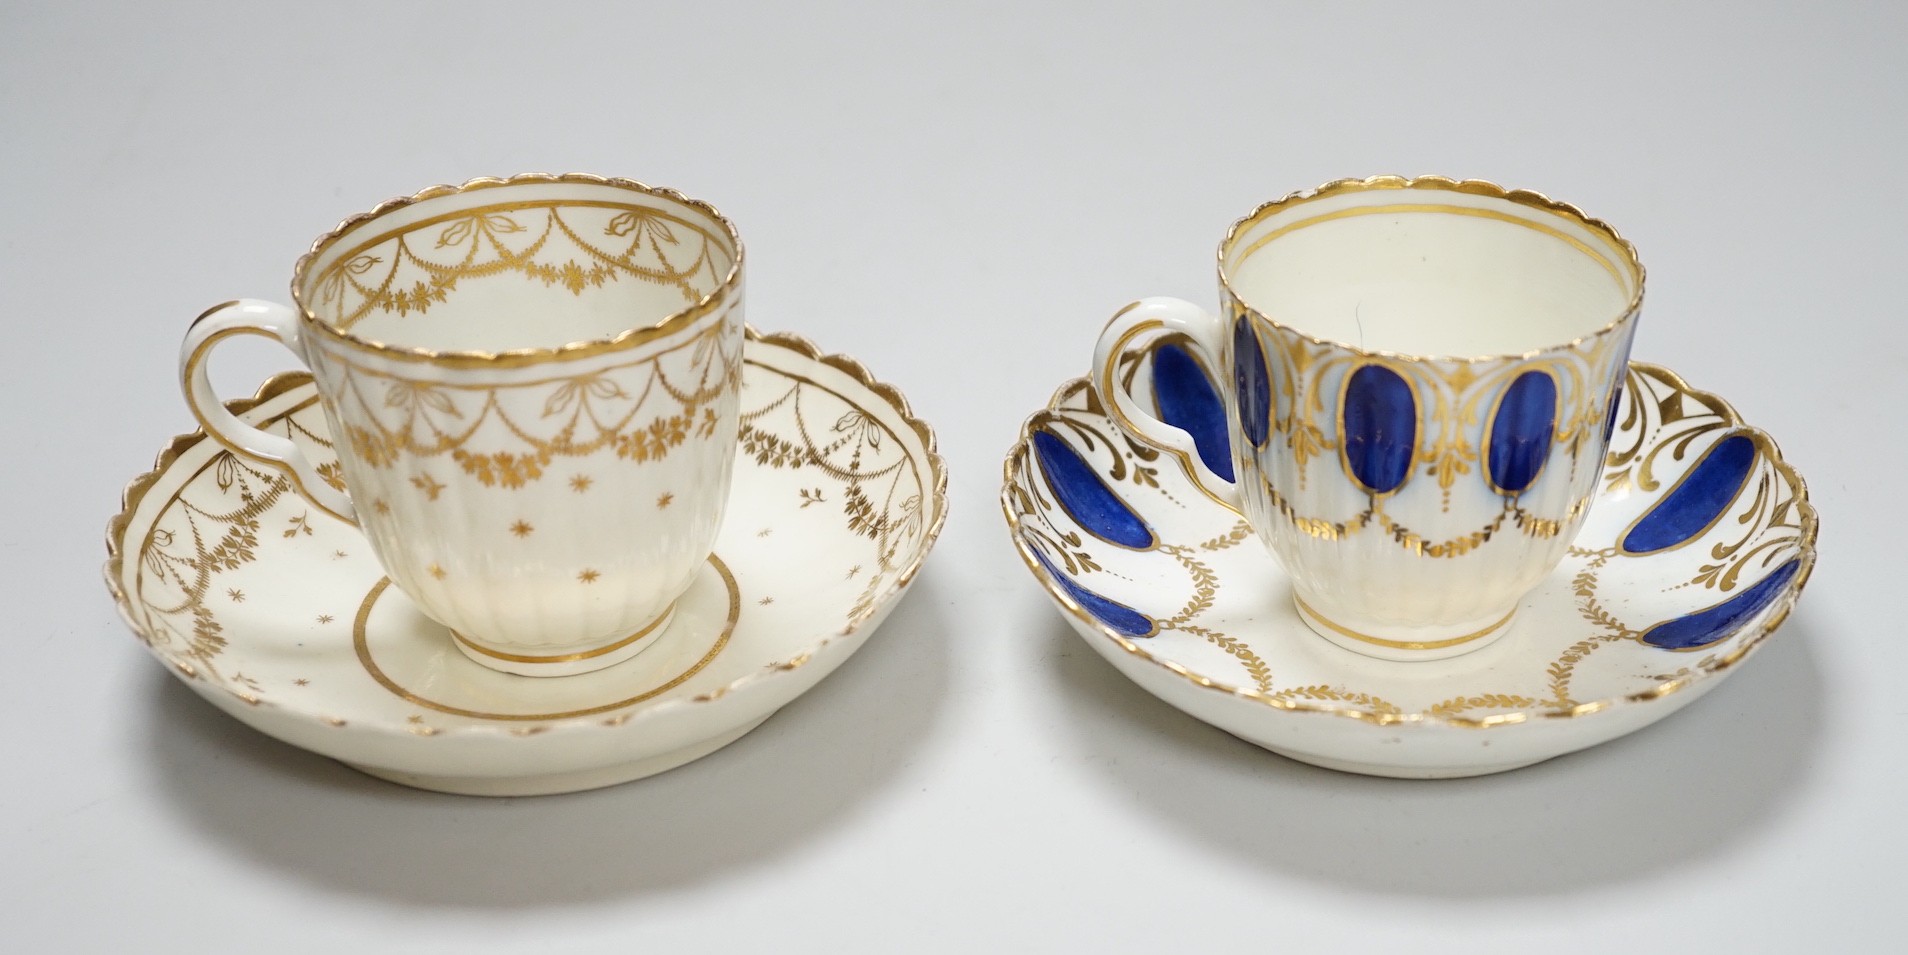 An 18th century Caughley coffee cup and saucer with blue pendants from gilt leafy swags and an 18th century Caughley coffee cup and saucer with an elaborately gilded border, both probably decorated at Chamberlains premis